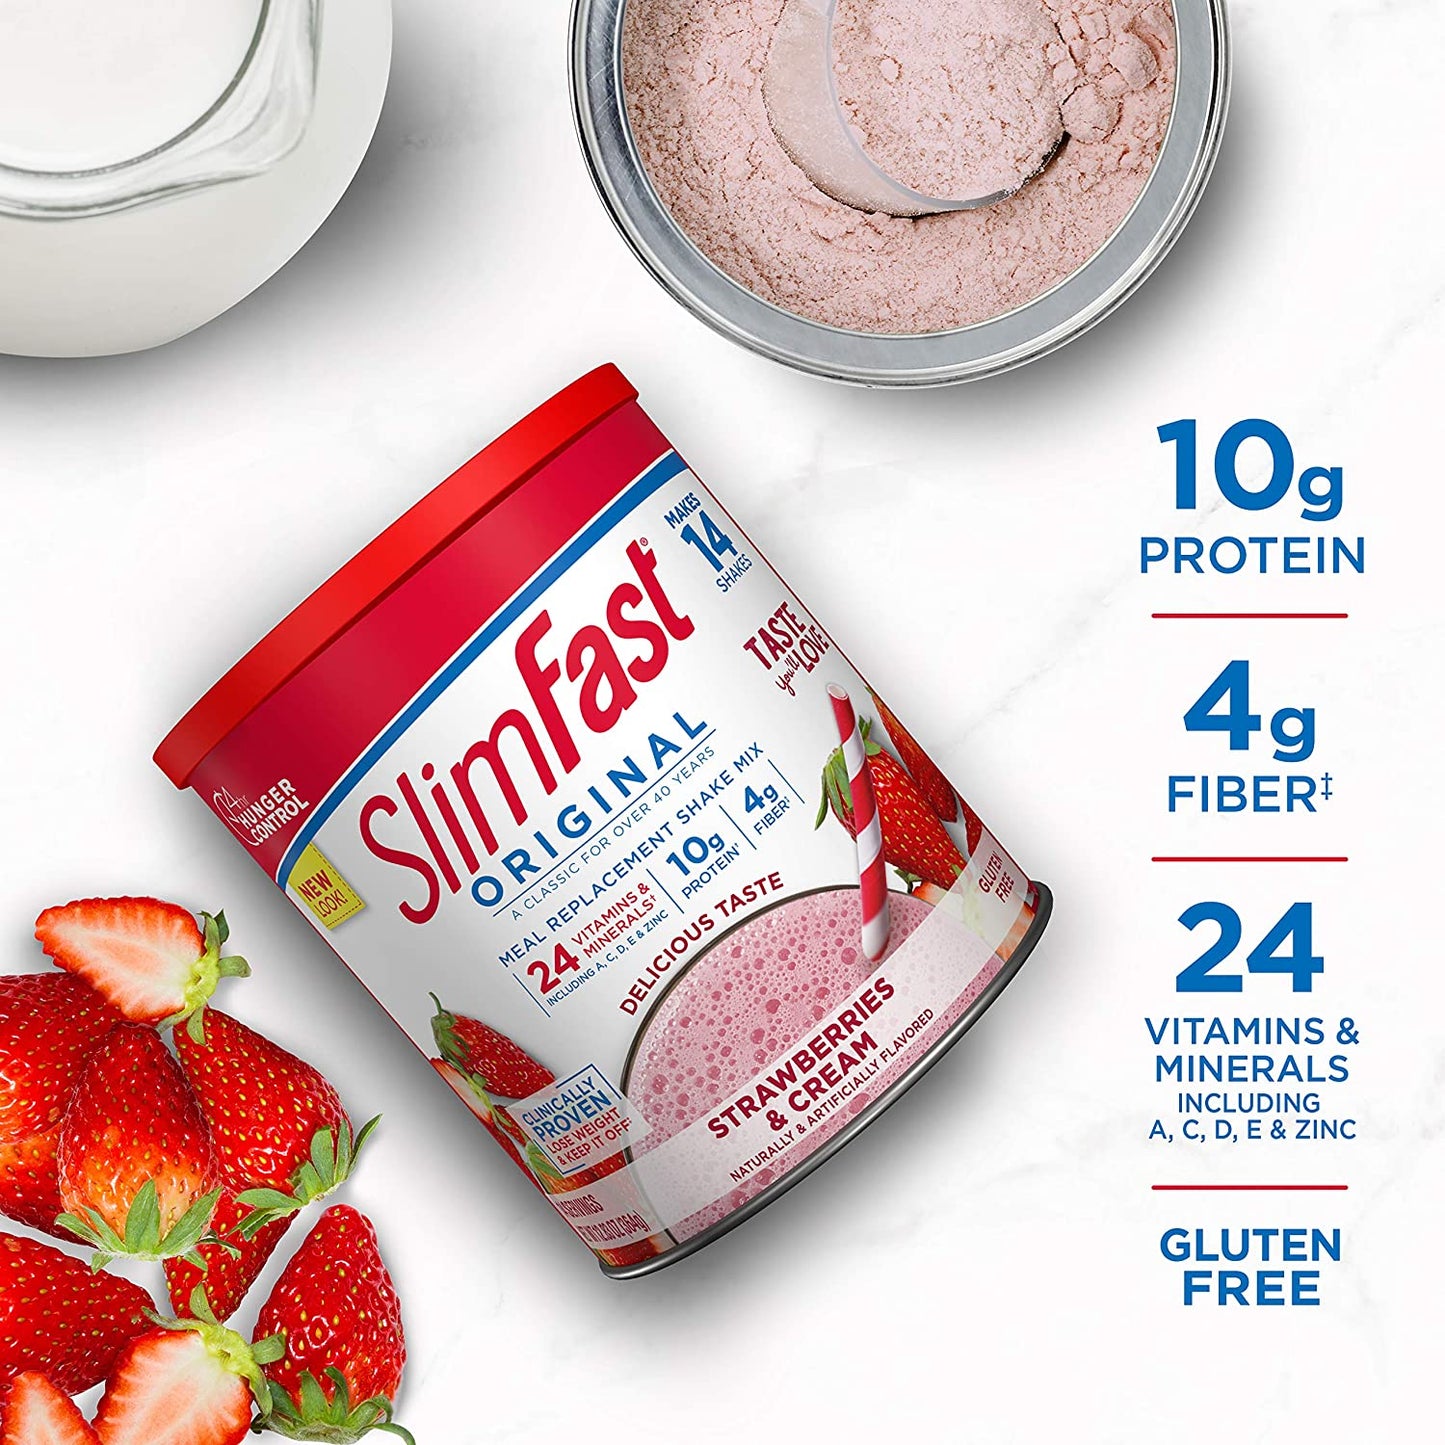 Meal Replacement Powder, Original Strawberries & Cream, Weight Loss Shake Mix, 10G of Protein, 14 Servings